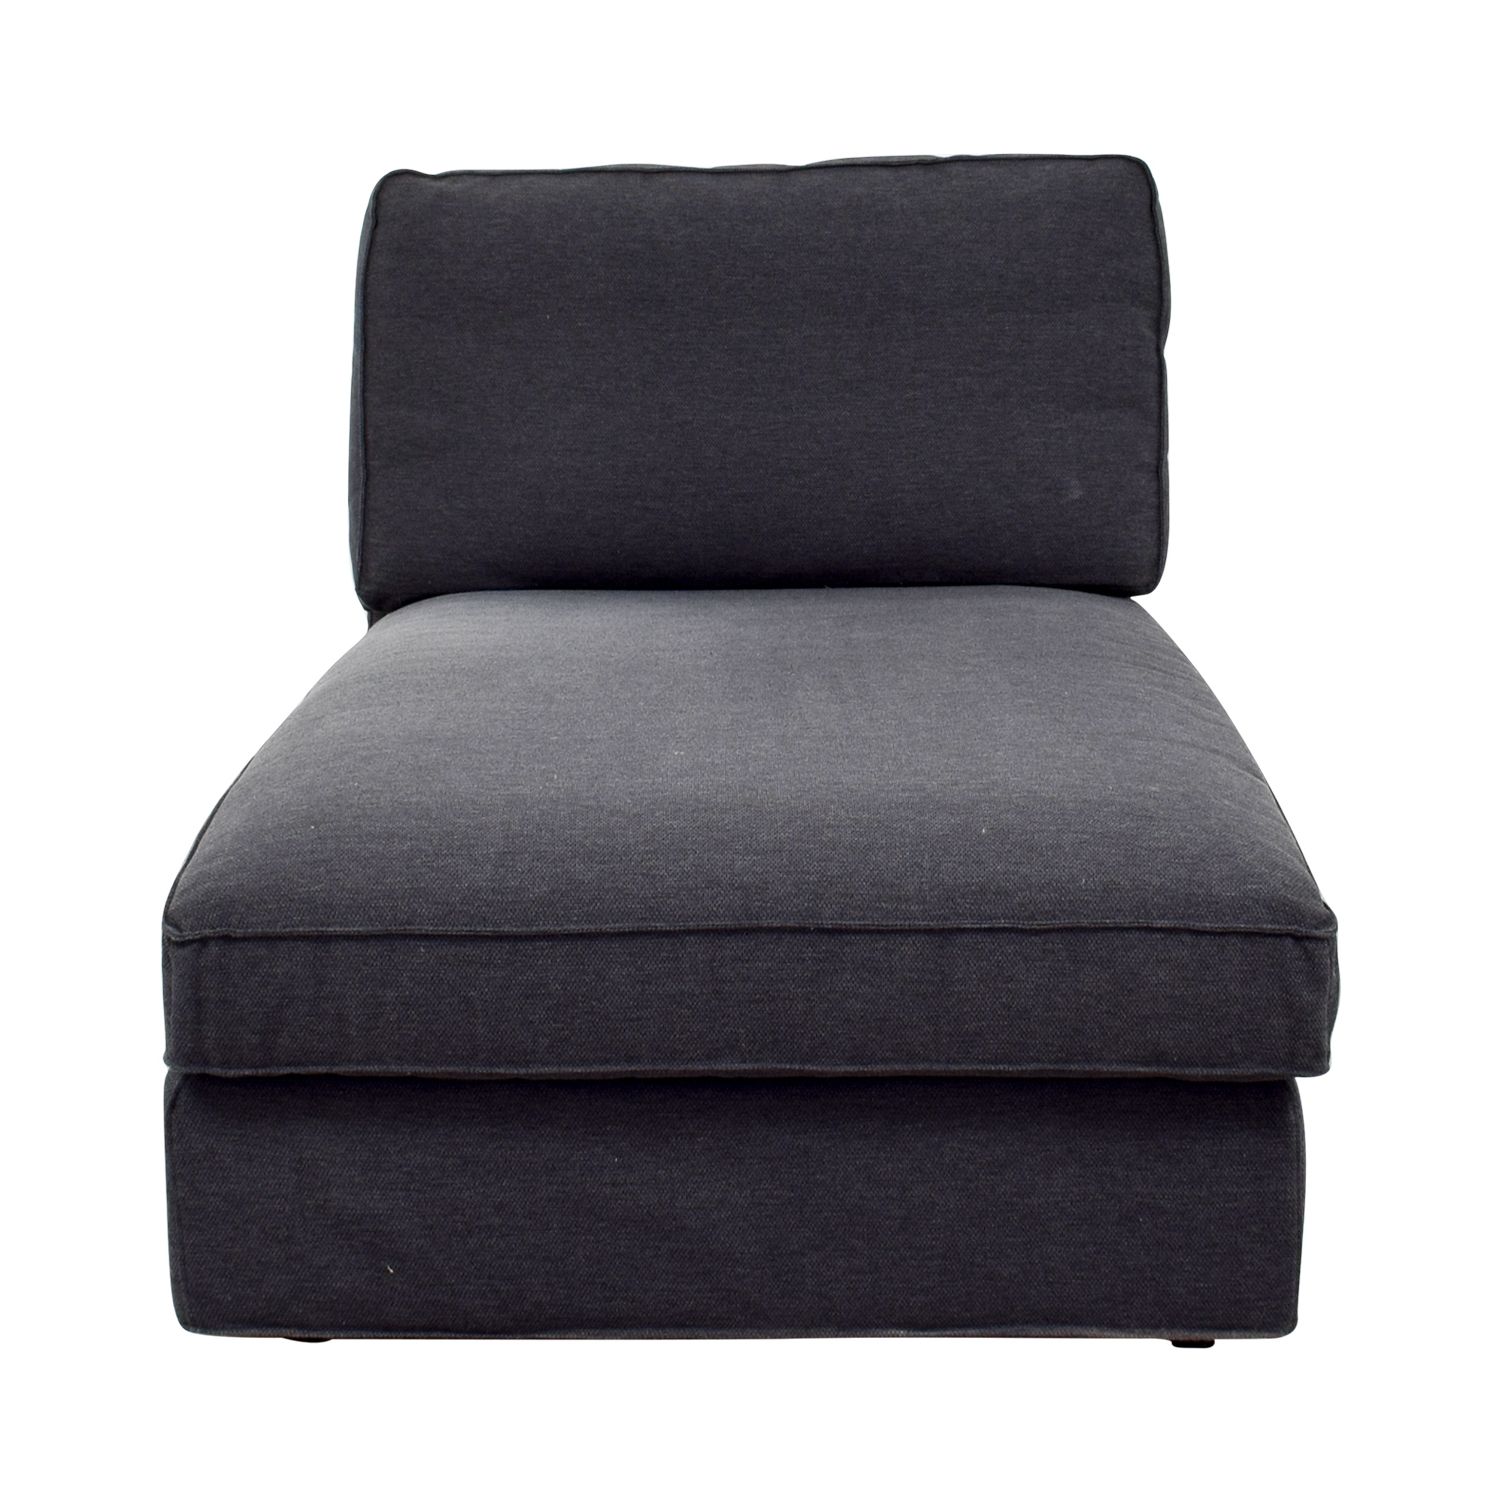 [%86% Off – Pottery Barn Pottery Barn Chaise Lounge / Sofas Regarding Fashionable Pottery Barn Chaises|pottery Barn Chaises In Newest 86% Off – Pottery Barn Pottery Barn Chaise Lounge / Sofas|trendy Pottery Barn Chaises Inside 86% Off – Pottery Barn Pottery Barn Chaise Lounge / Sofas|favorite 86% Off – Pottery Barn Pottery Barn Chaise Lounge / Sofas Pertaining To Pottery Barn Chaises%] (Photo 11 of 15)